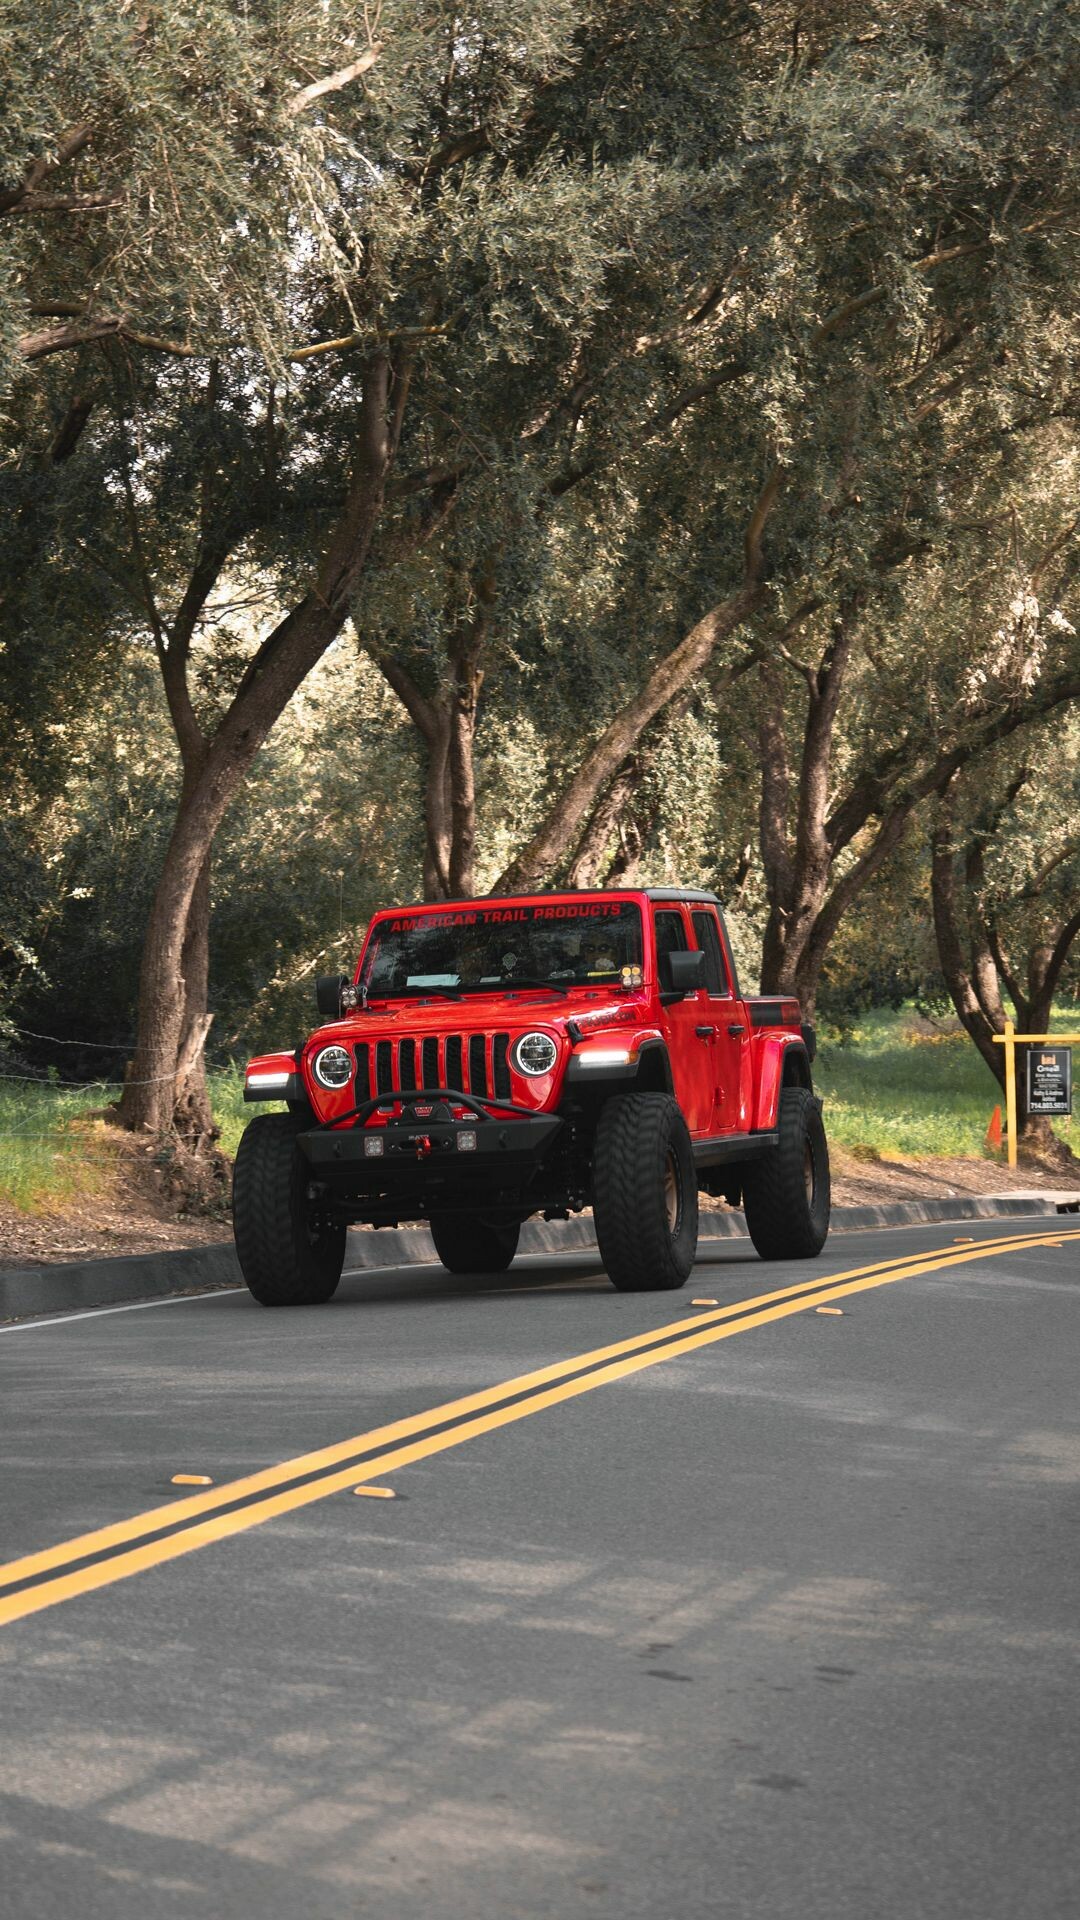 Jeep: A division of Chrysler, The off-road iconoclast founded in 1941. 1080x1920 Full HD Background.